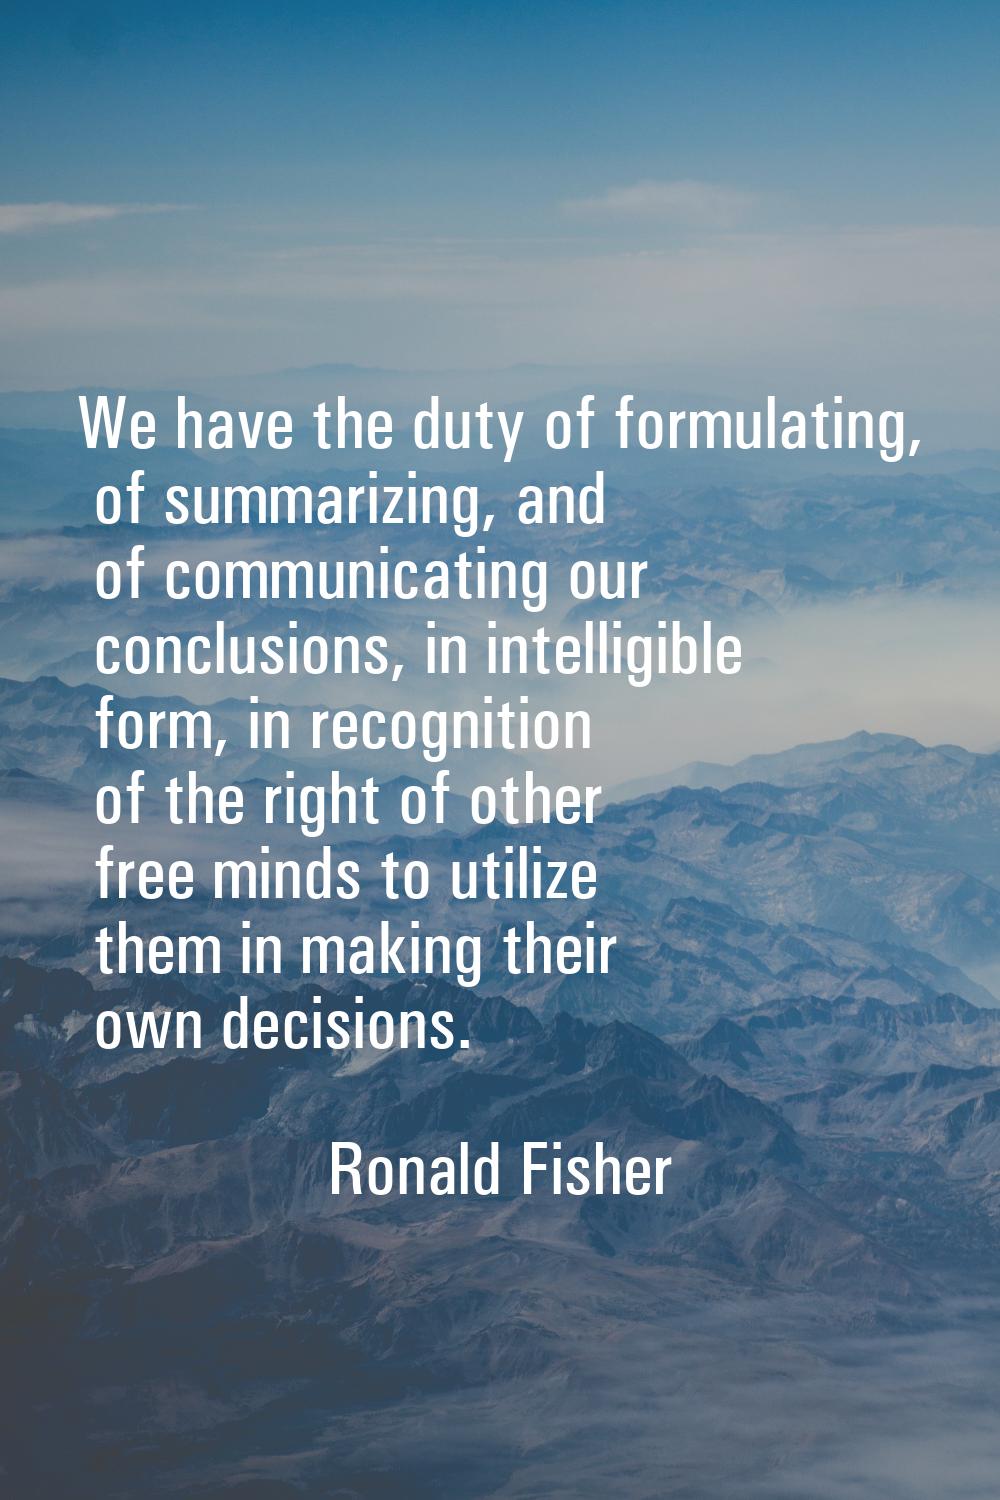 We have the duty of formulating, of summarizing, and of communicating our conclusions, in intelligi